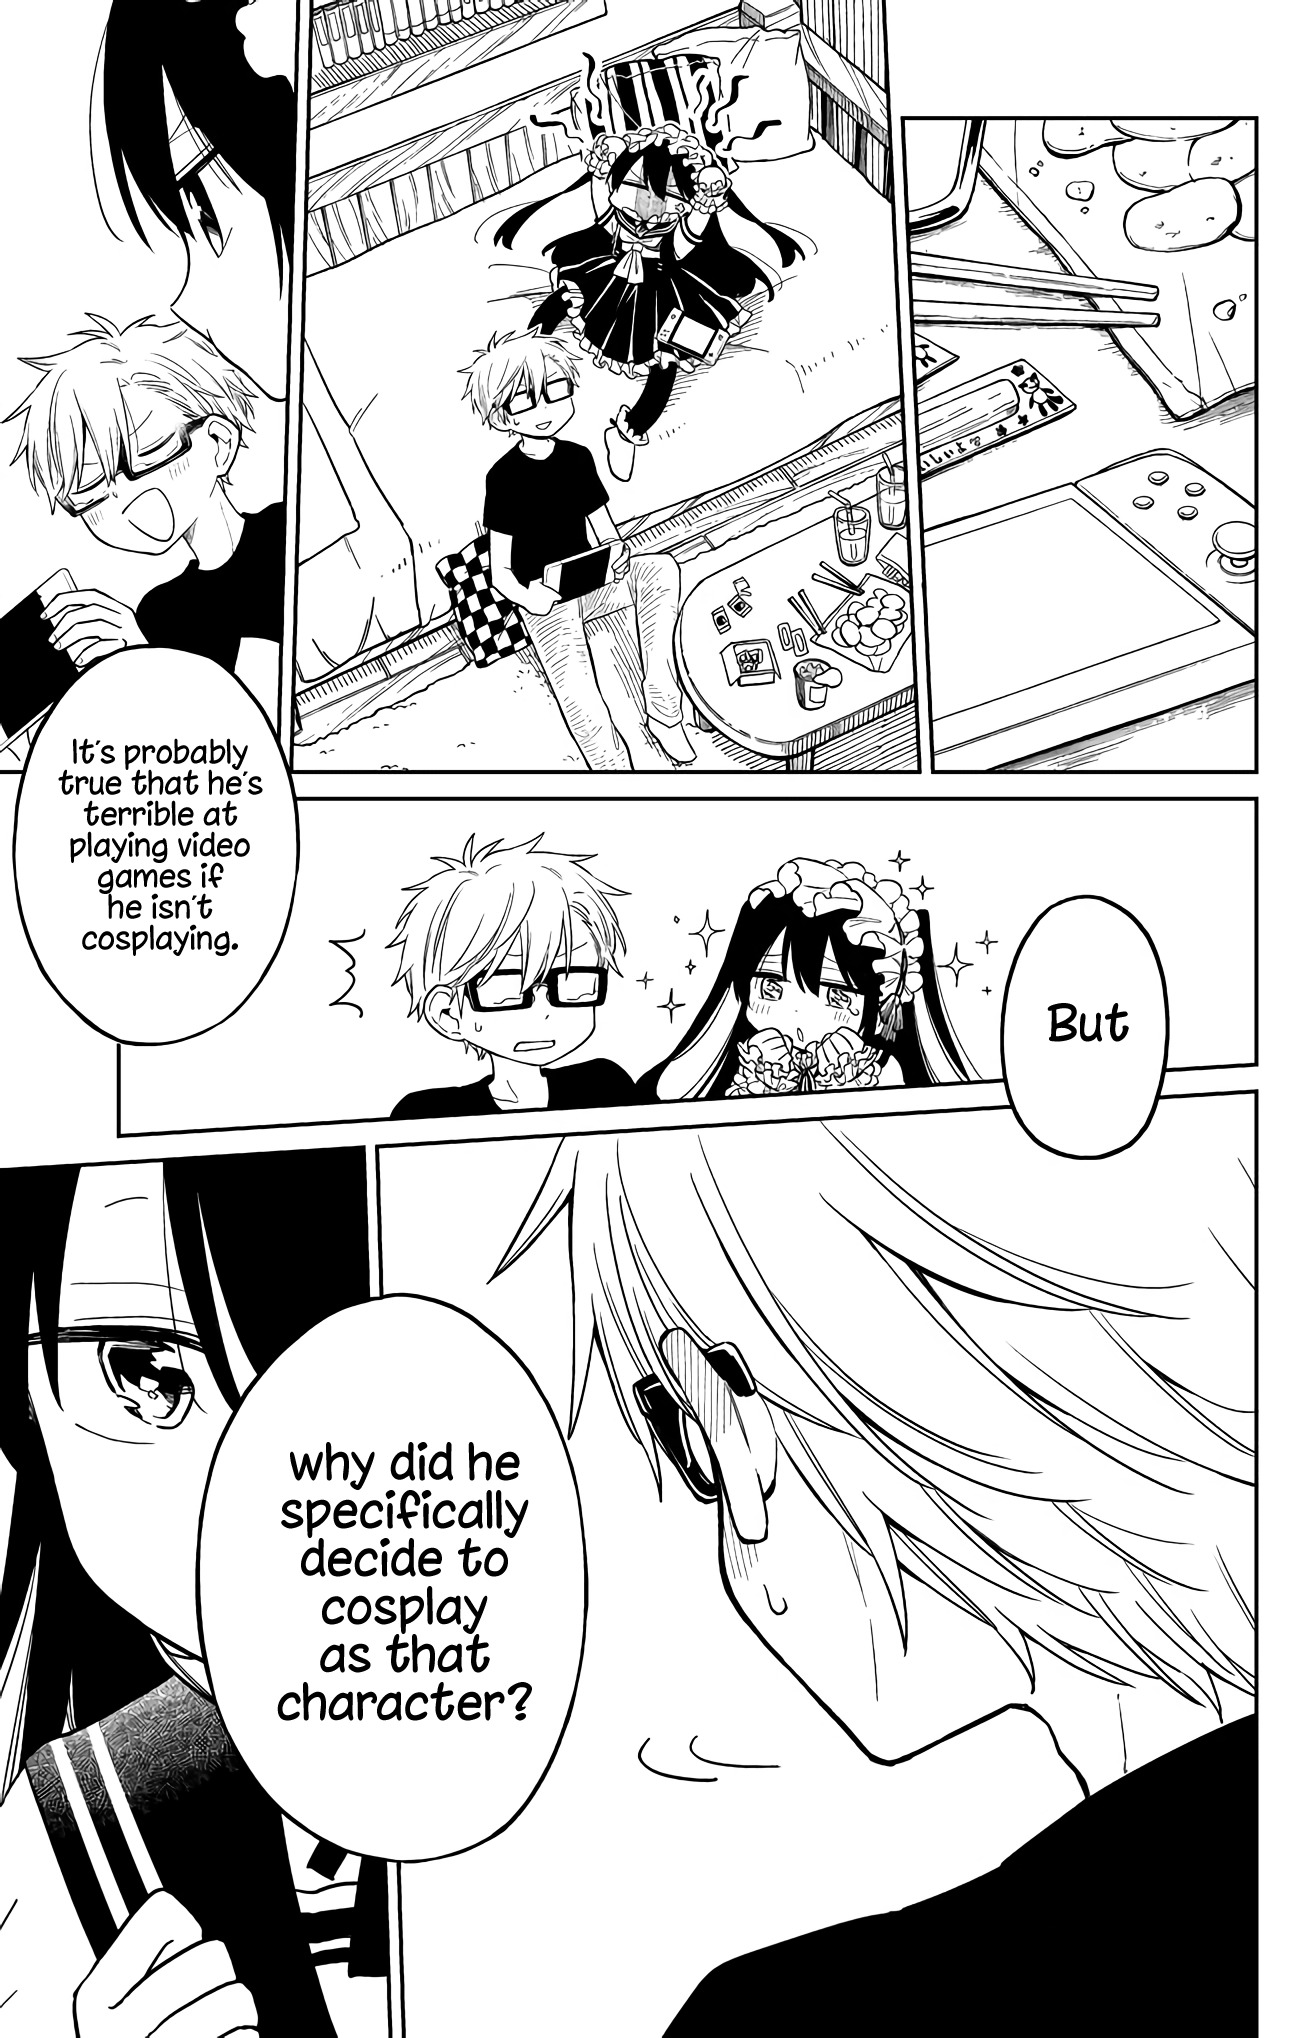 About a Guy Who's Been Destroyed From His First Love Being a Pretty Girl ch.8